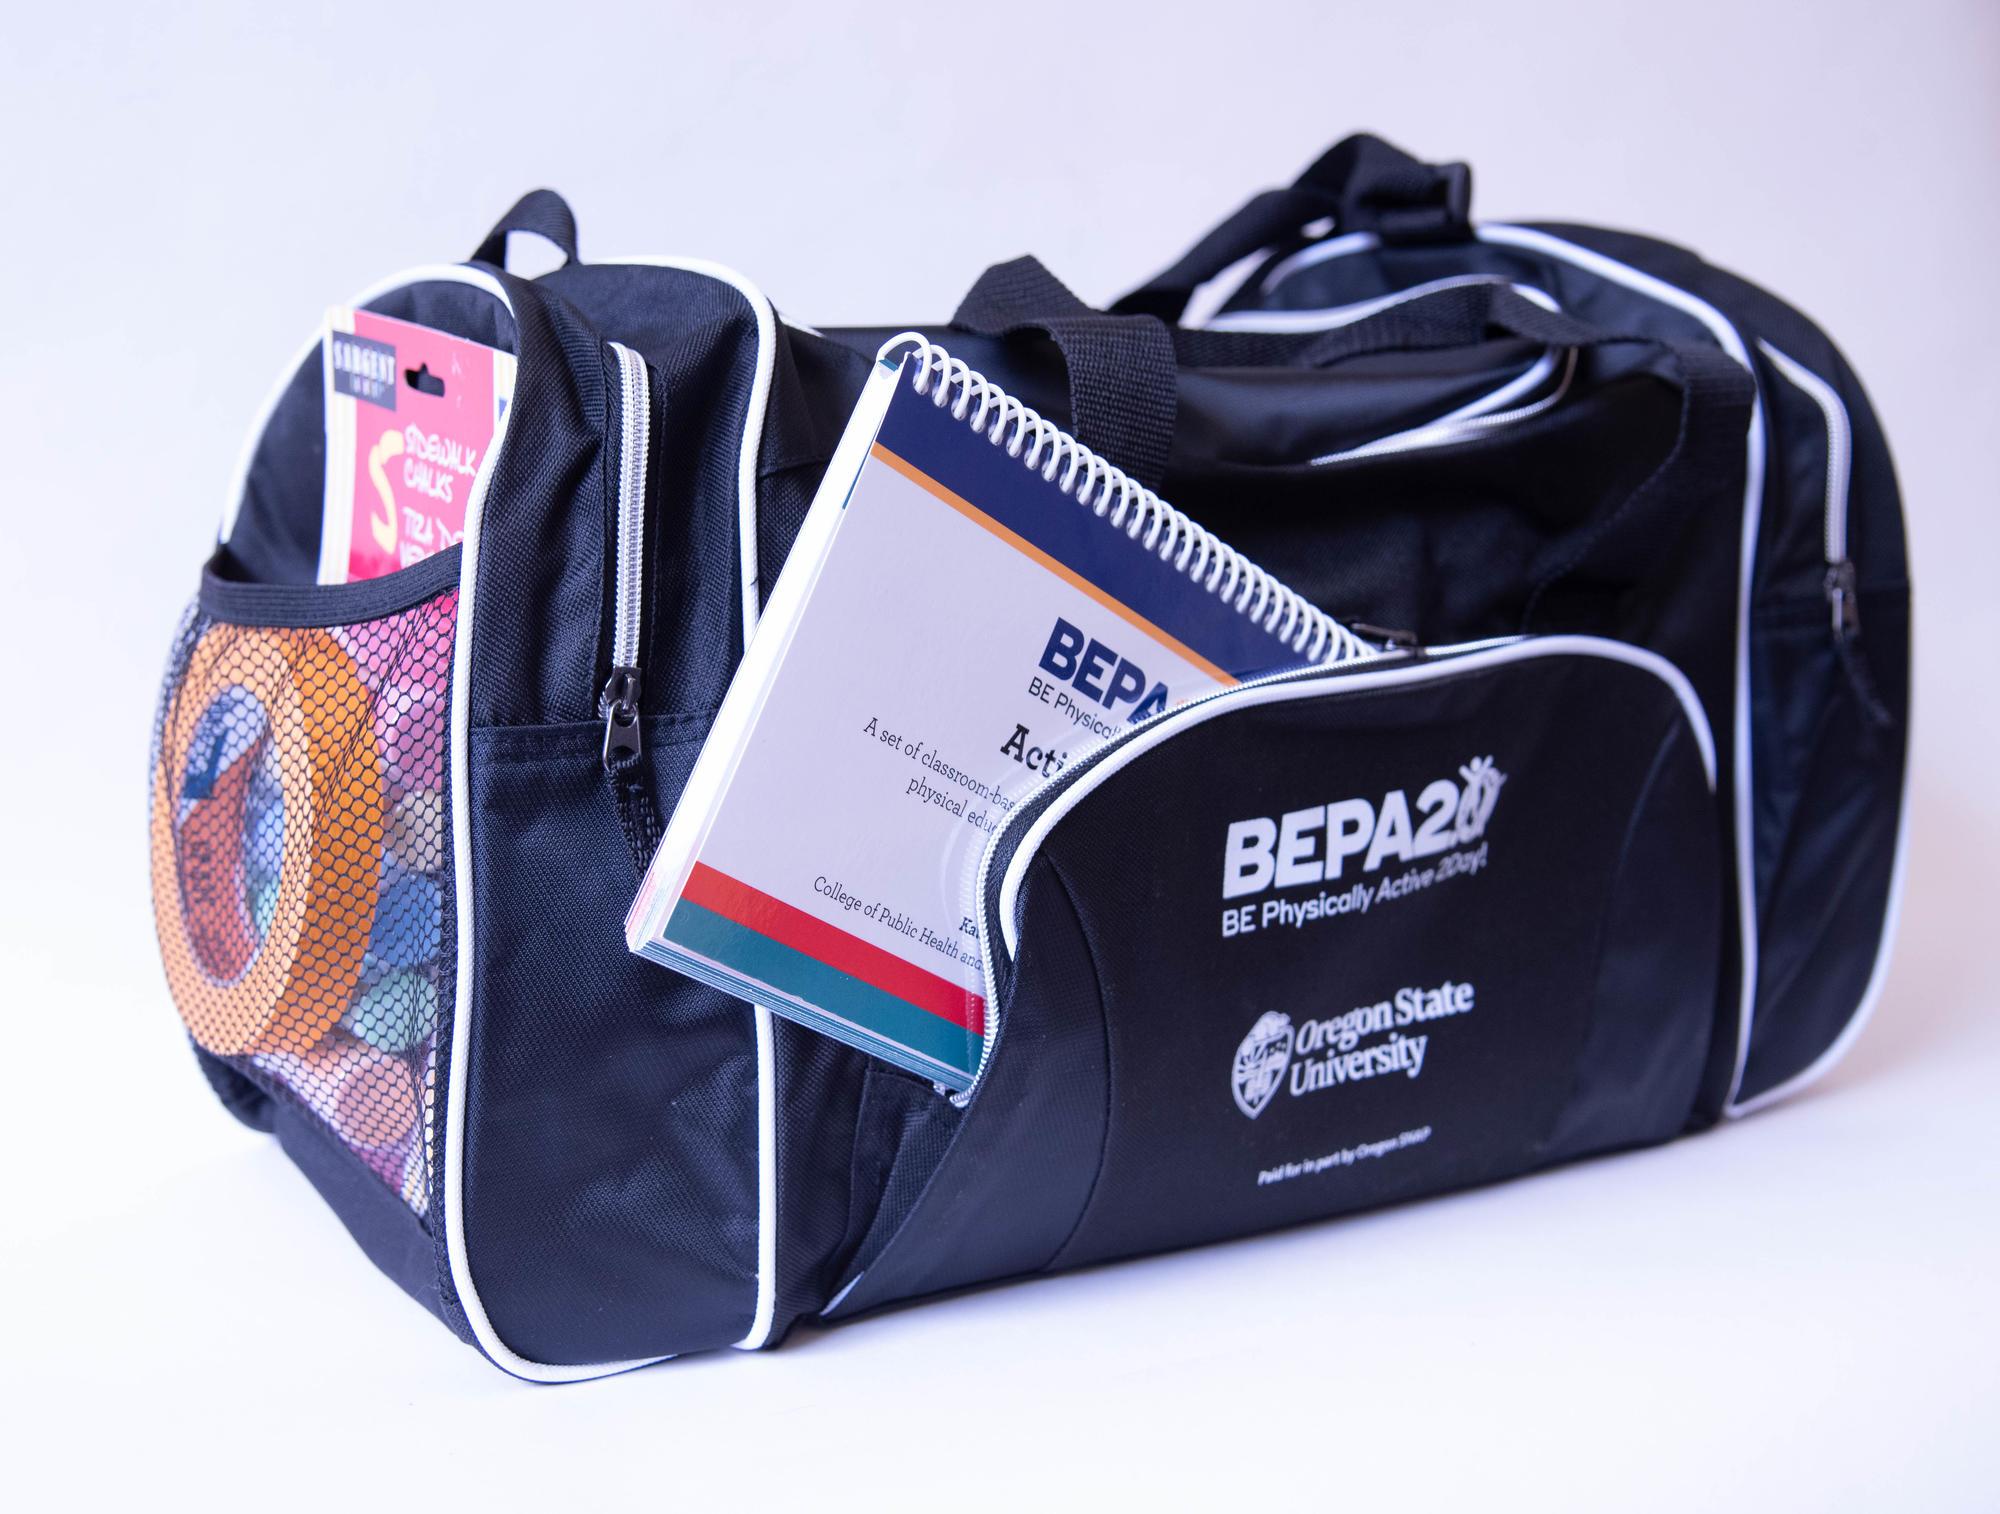 Black BEPA 2.0 duffle bag with book, tape, and chalk in the pockets